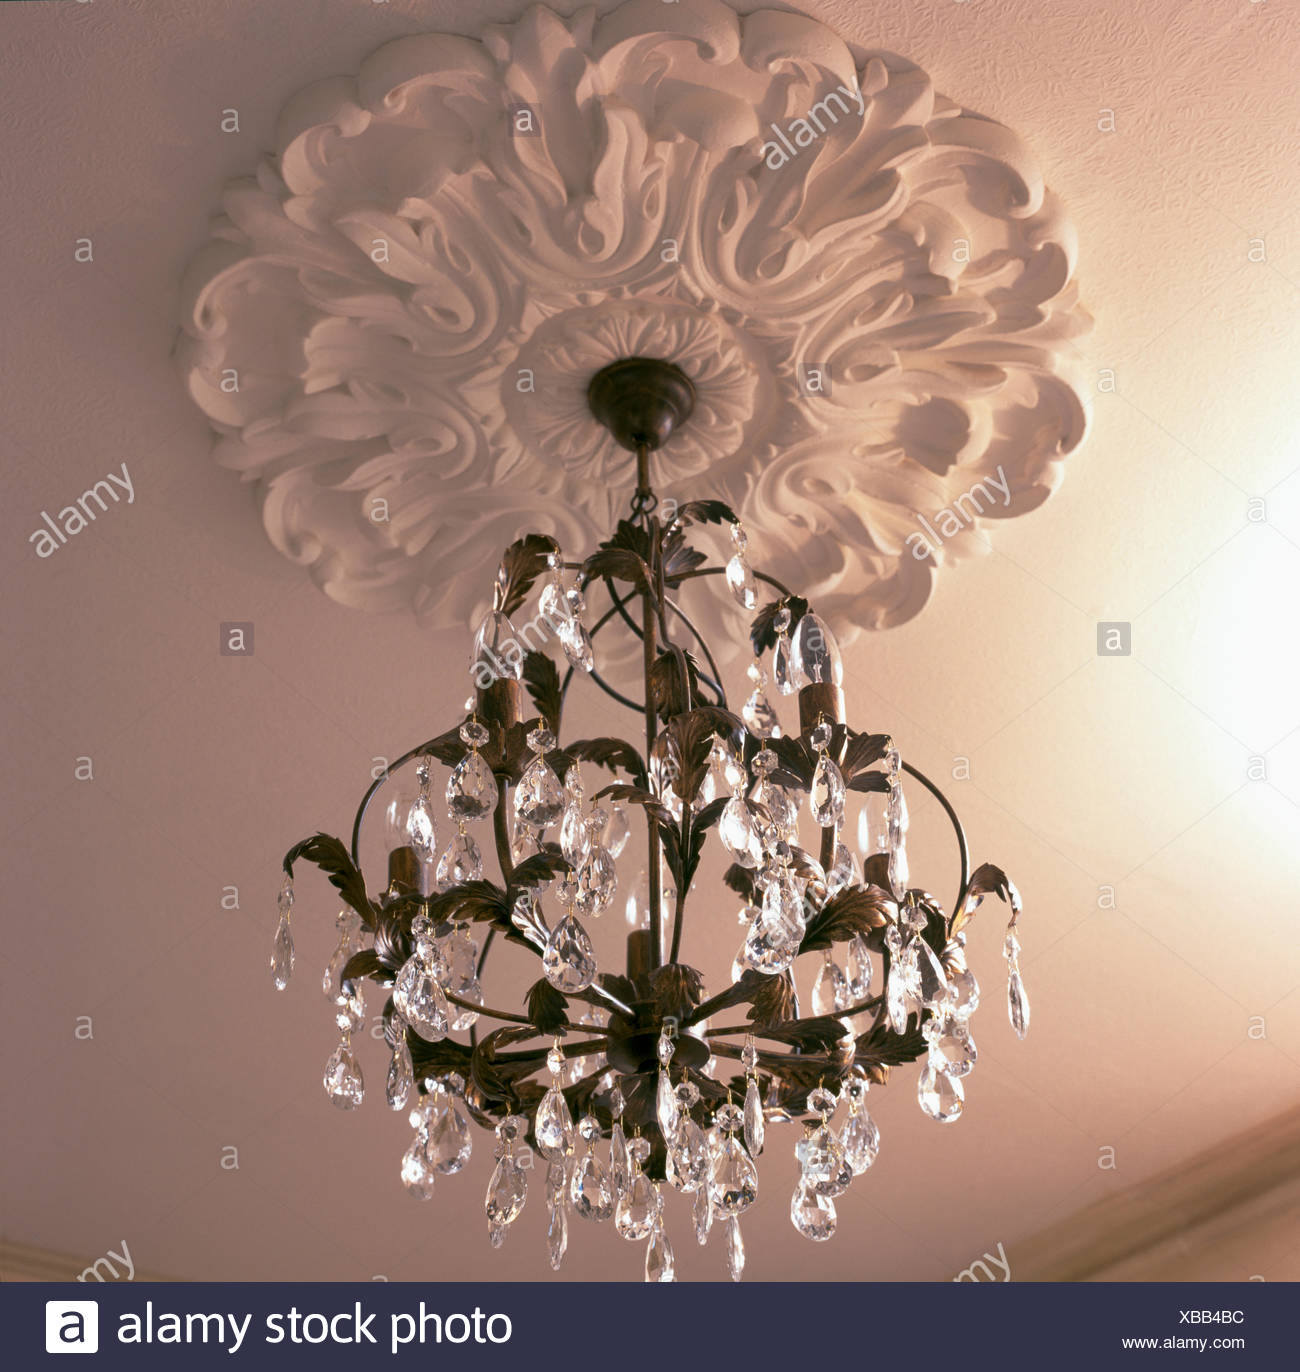 Close Up Of Glass Chandelier Hanging From Ornate Plaster Ceiling